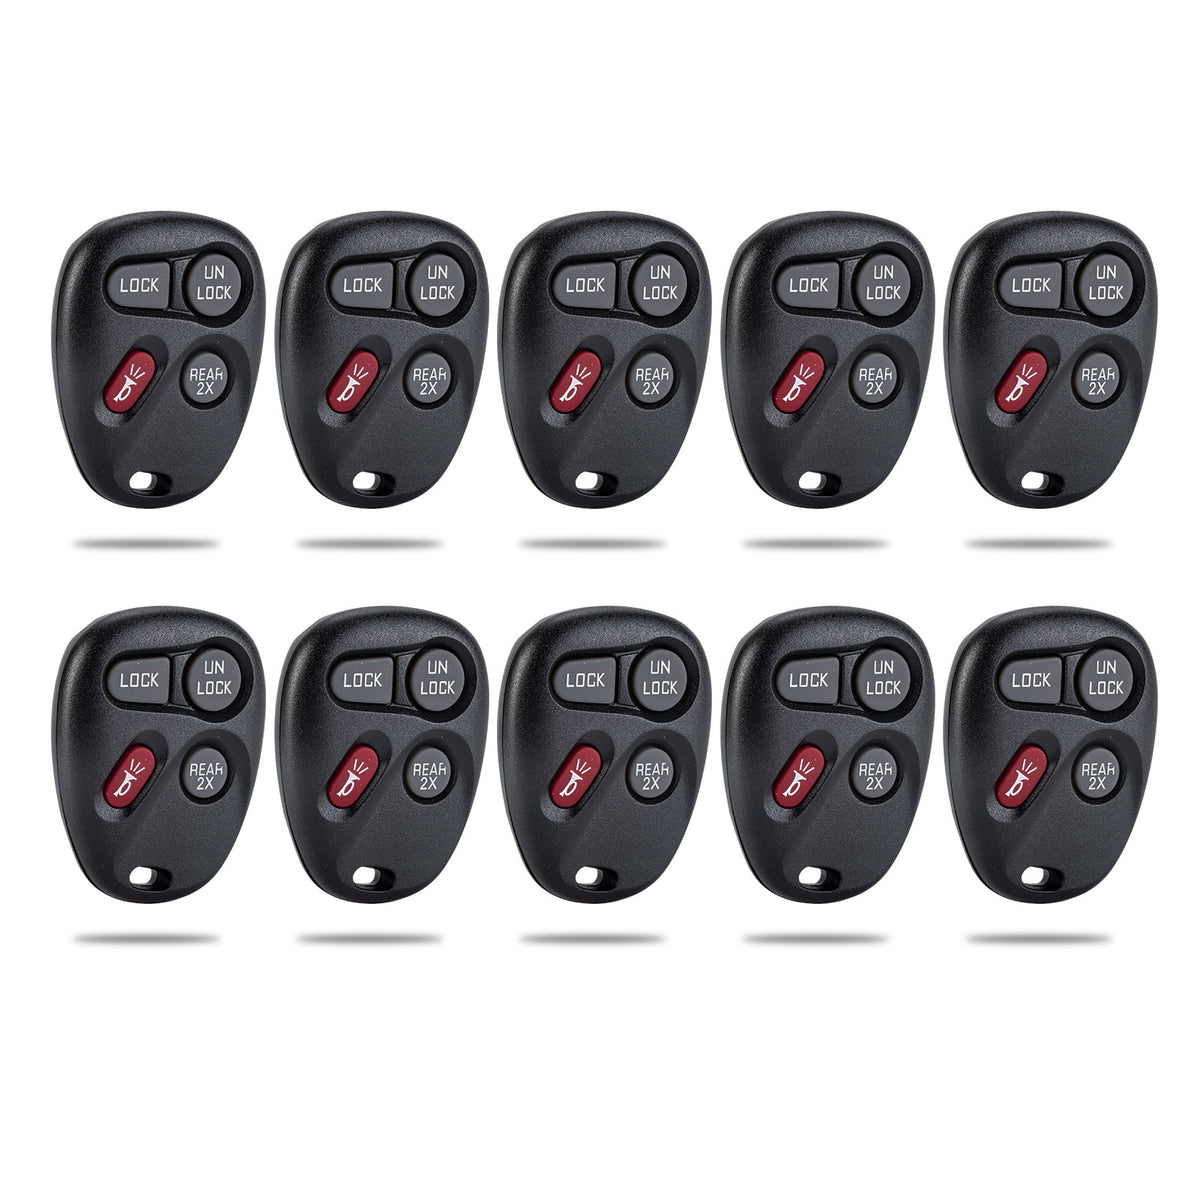 Lots of 10 Extra-Partss Car Remote Fob Replacement for Chevy KOBUT1BT 15732805 fits 1998 1999 2000 2001 Blazer 4 Button